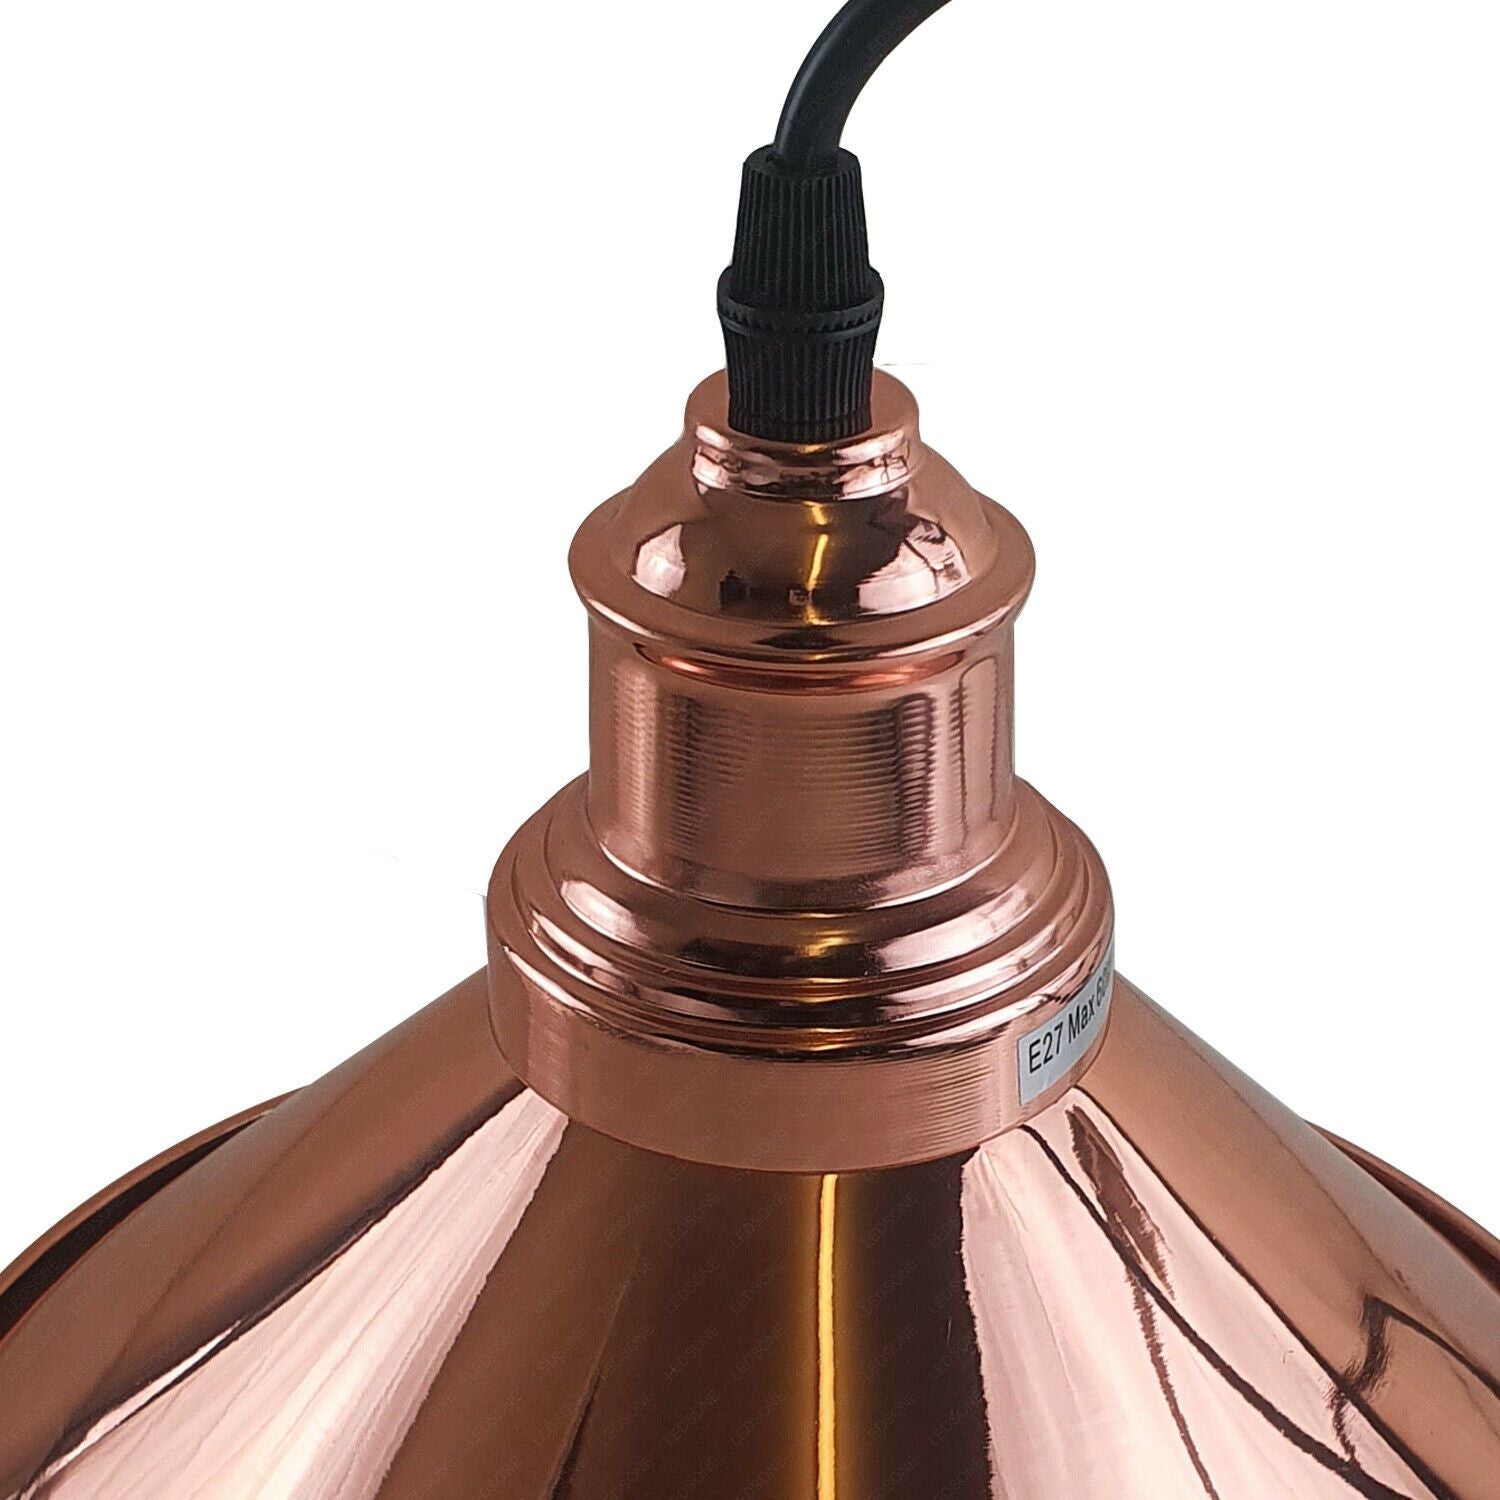 Vintage Pendant Ceiling Lighting Fixture with Metal cone Lampshade, E27, Hanging Lights, Ceiling Lamps for Kitchen, Hallway, Lantern, Dining Room, Bedroom, restaurant